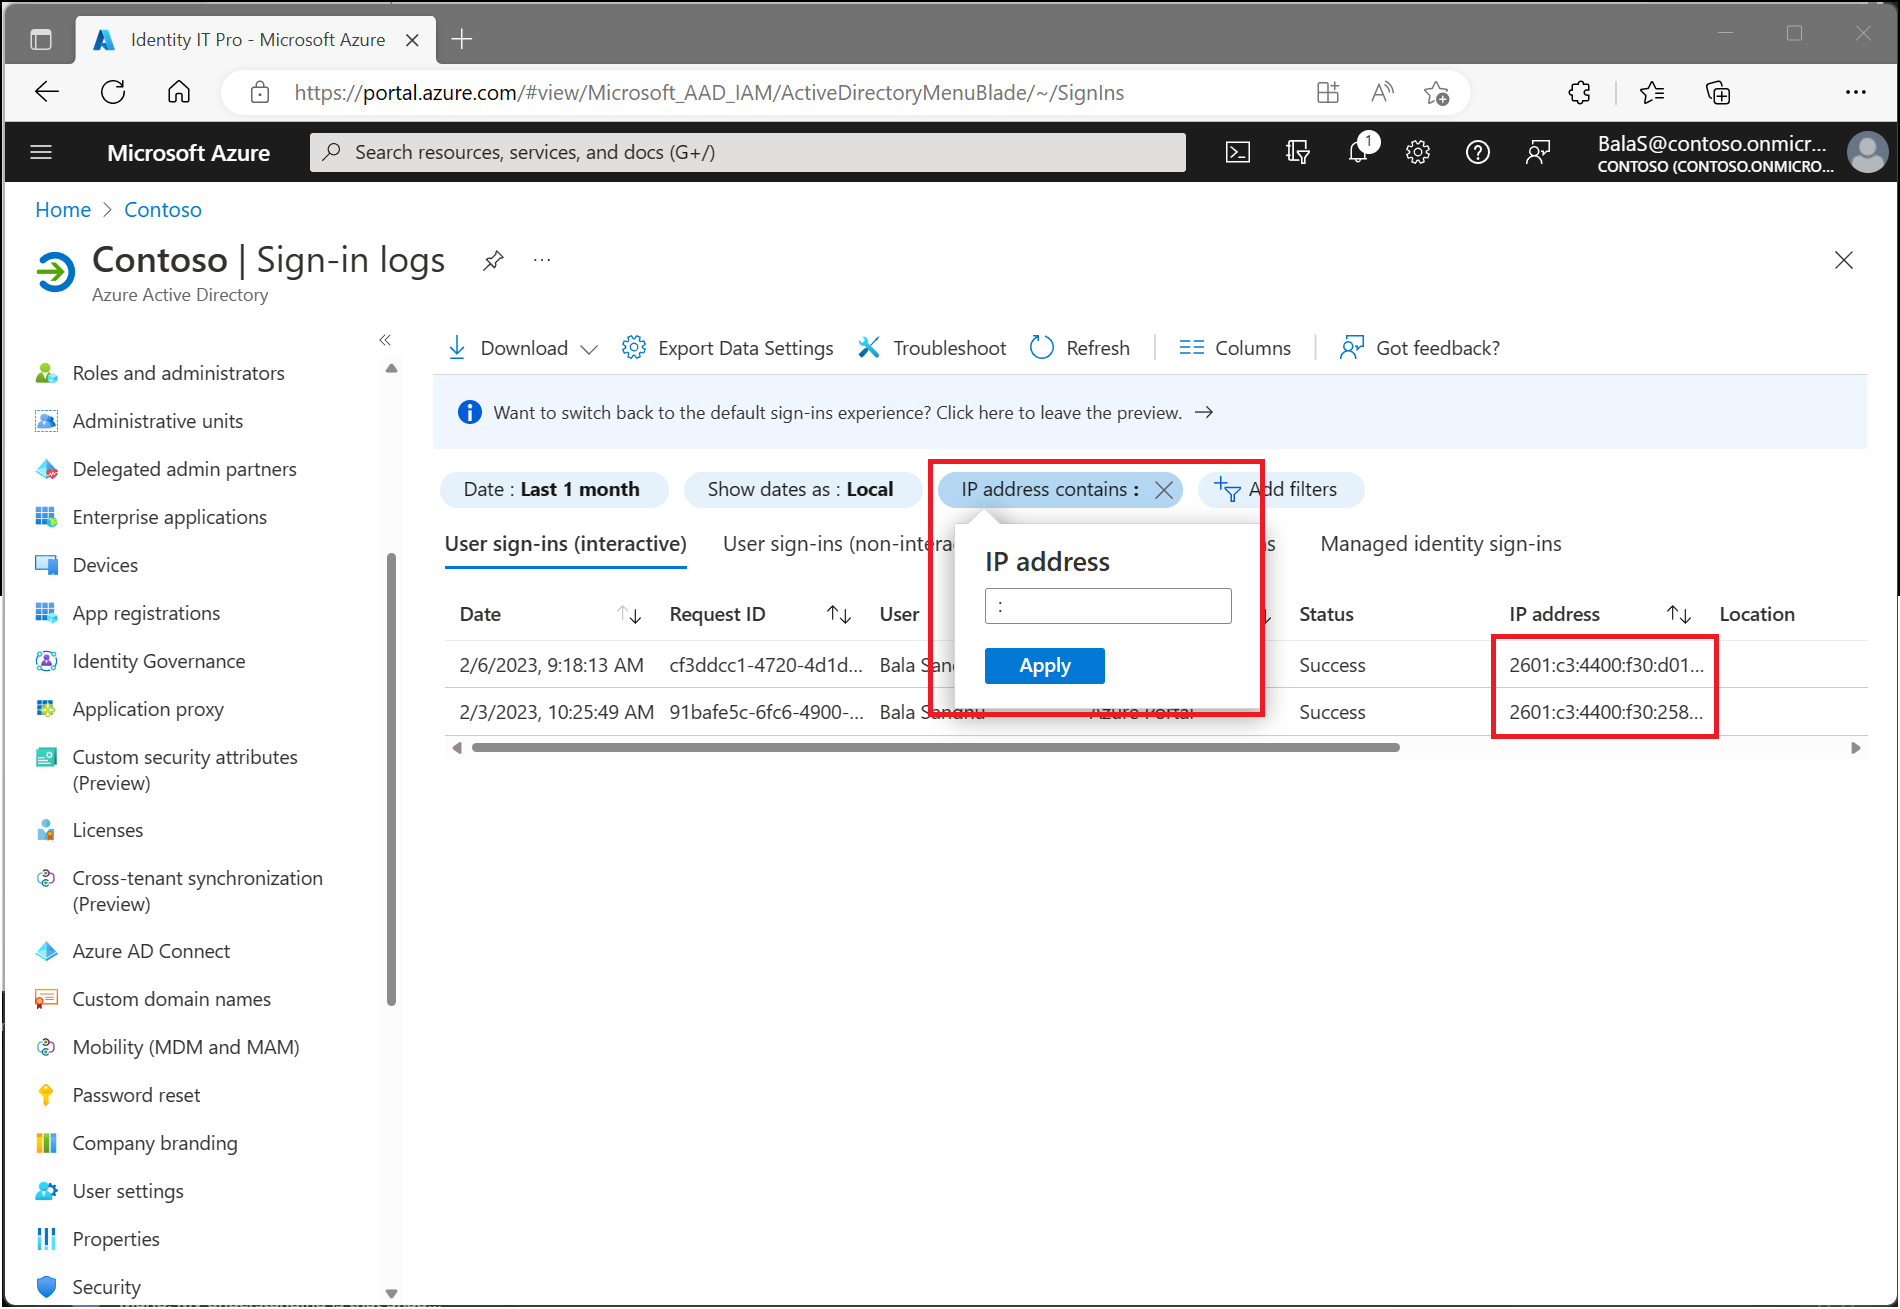 A screenshot showing Azure AD Sign-in logs and an IP address filter for IPv6 addresses.